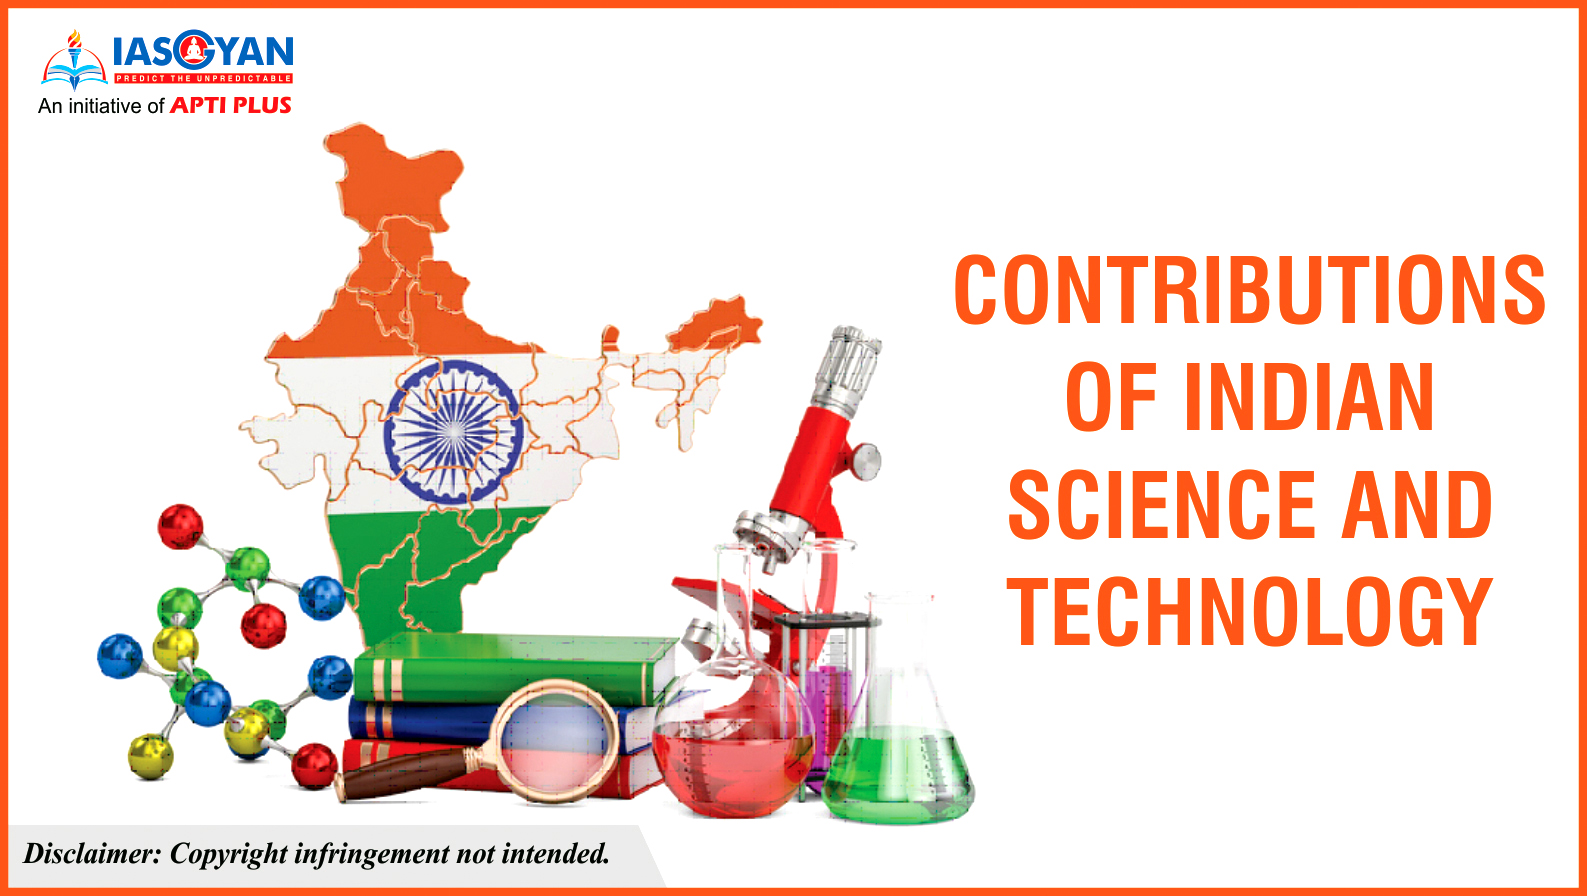 CONTRIBUTIONS OF INDIAN SCIENCE AND TECHNOLOGY